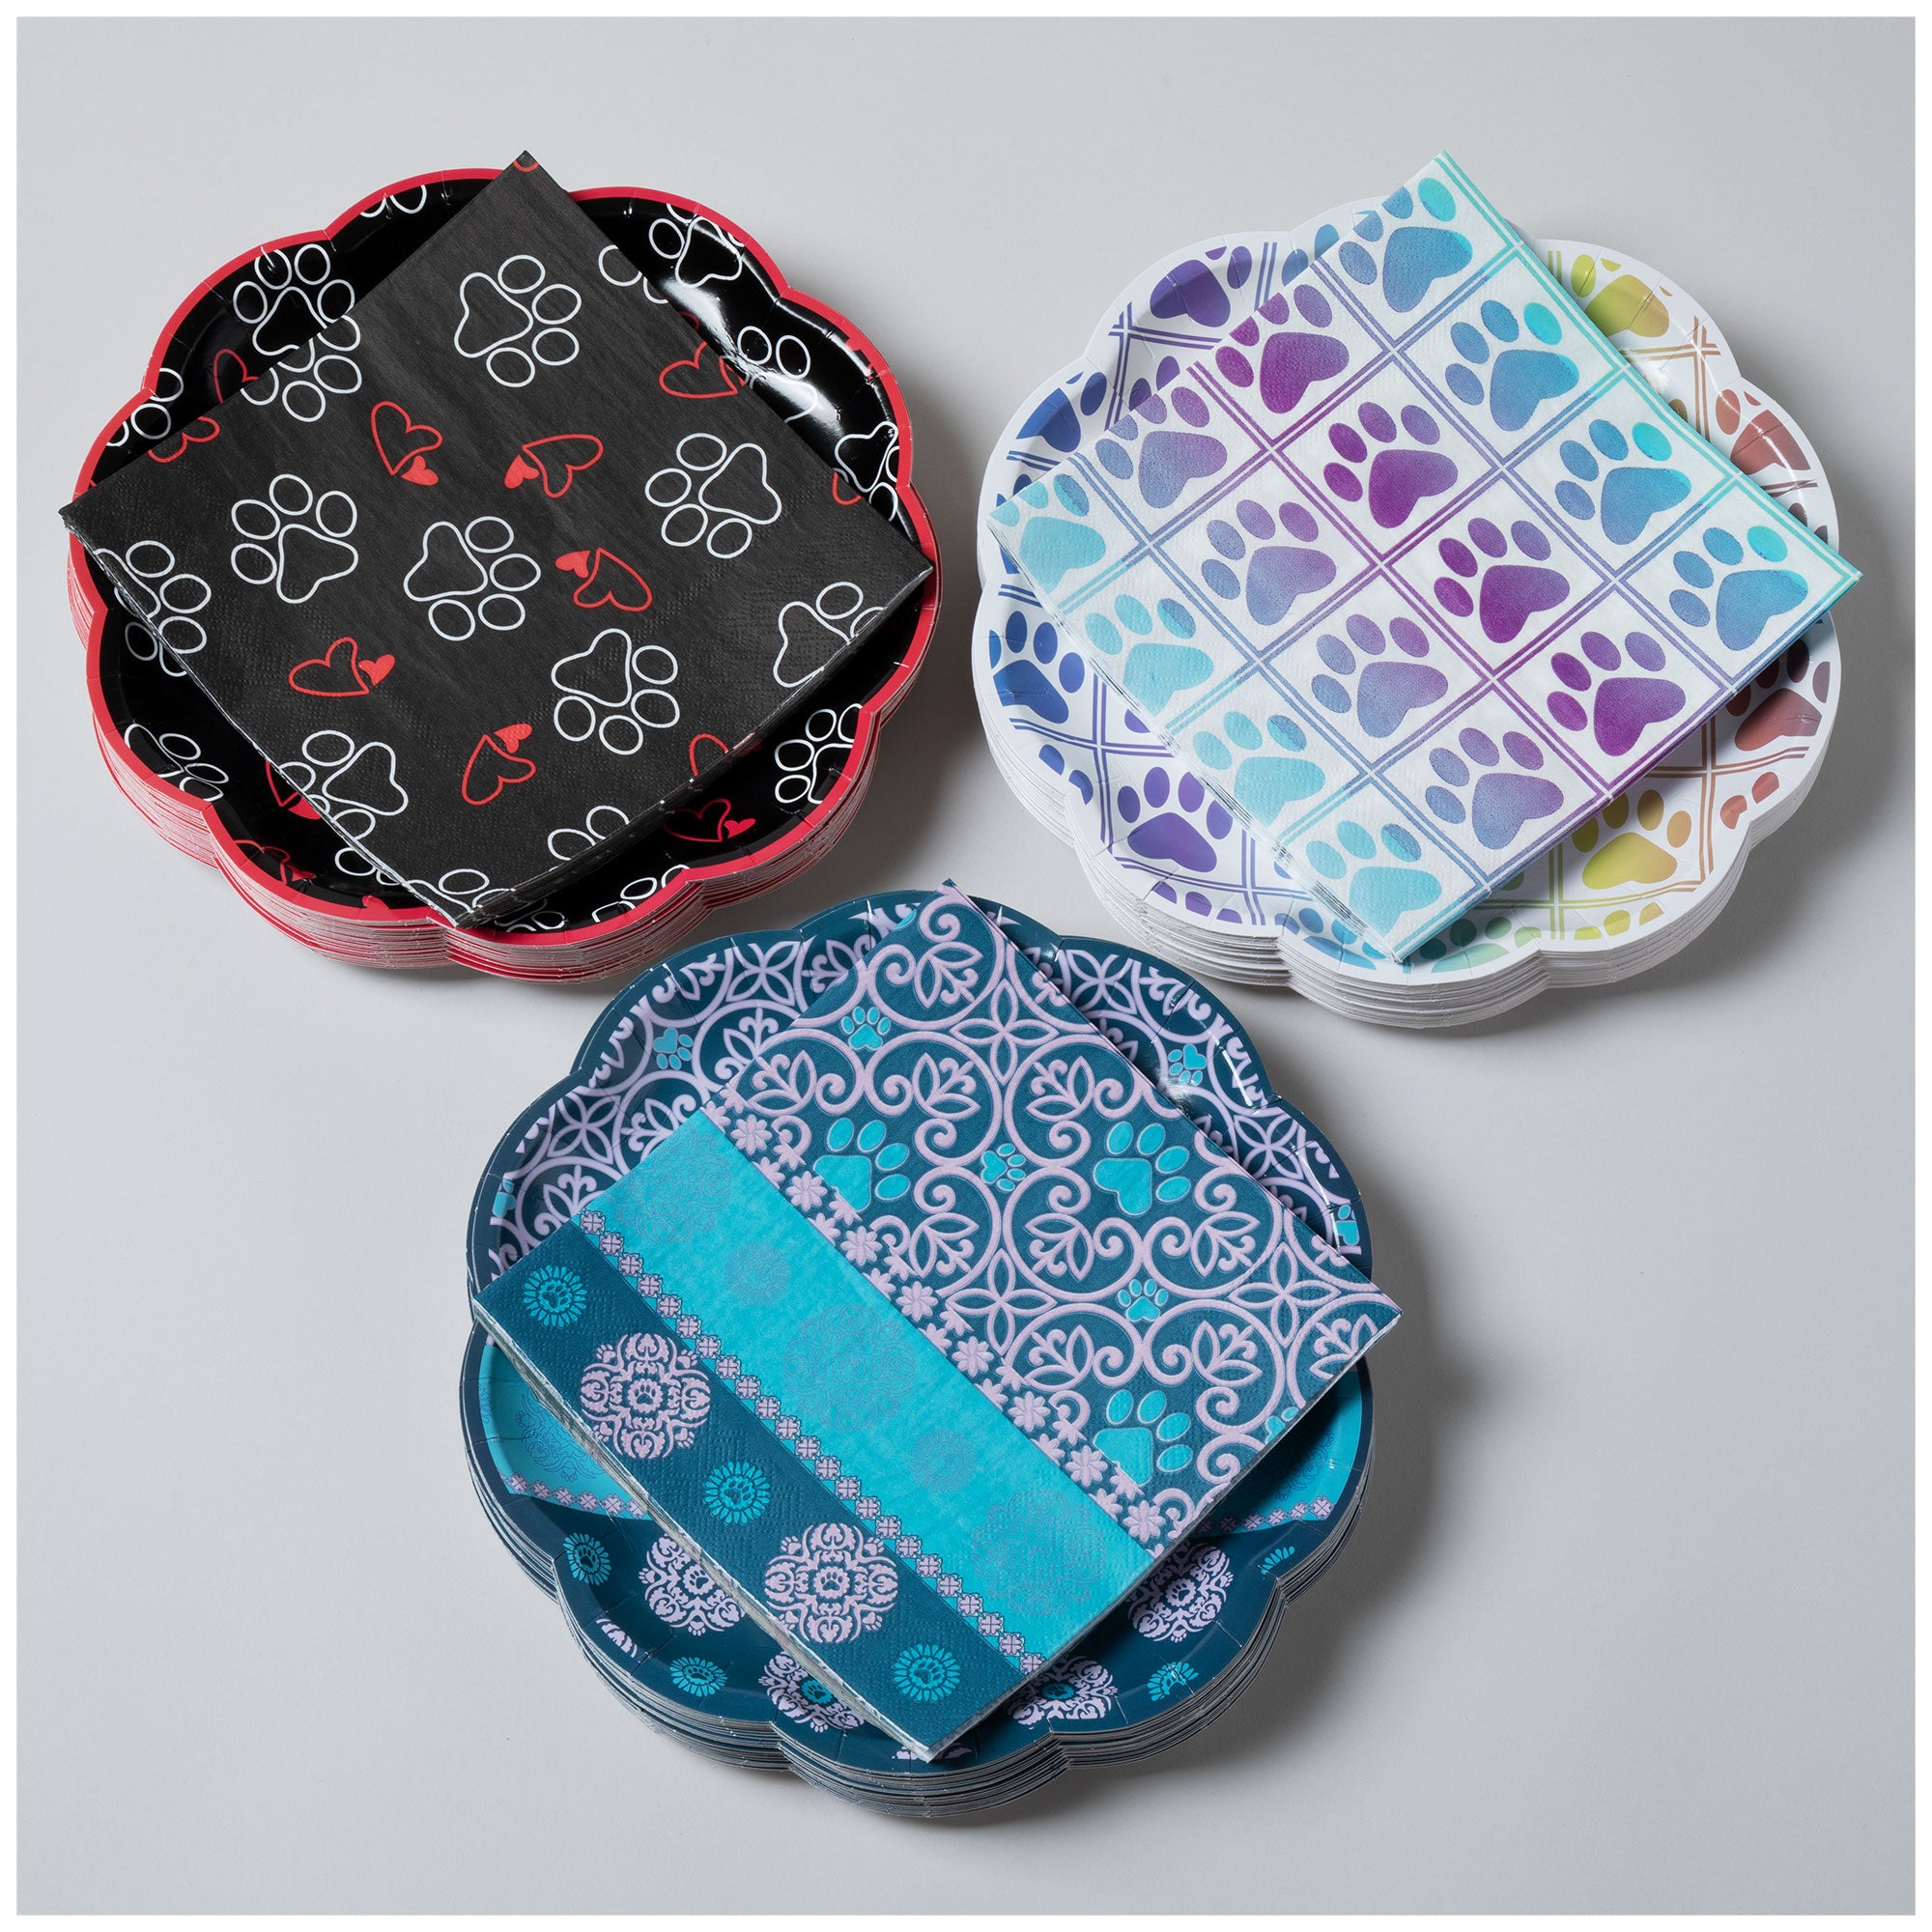 Pawfect Occasion Paper Plates & Napkins - Outlined Paws & Hearts - Napkins Only